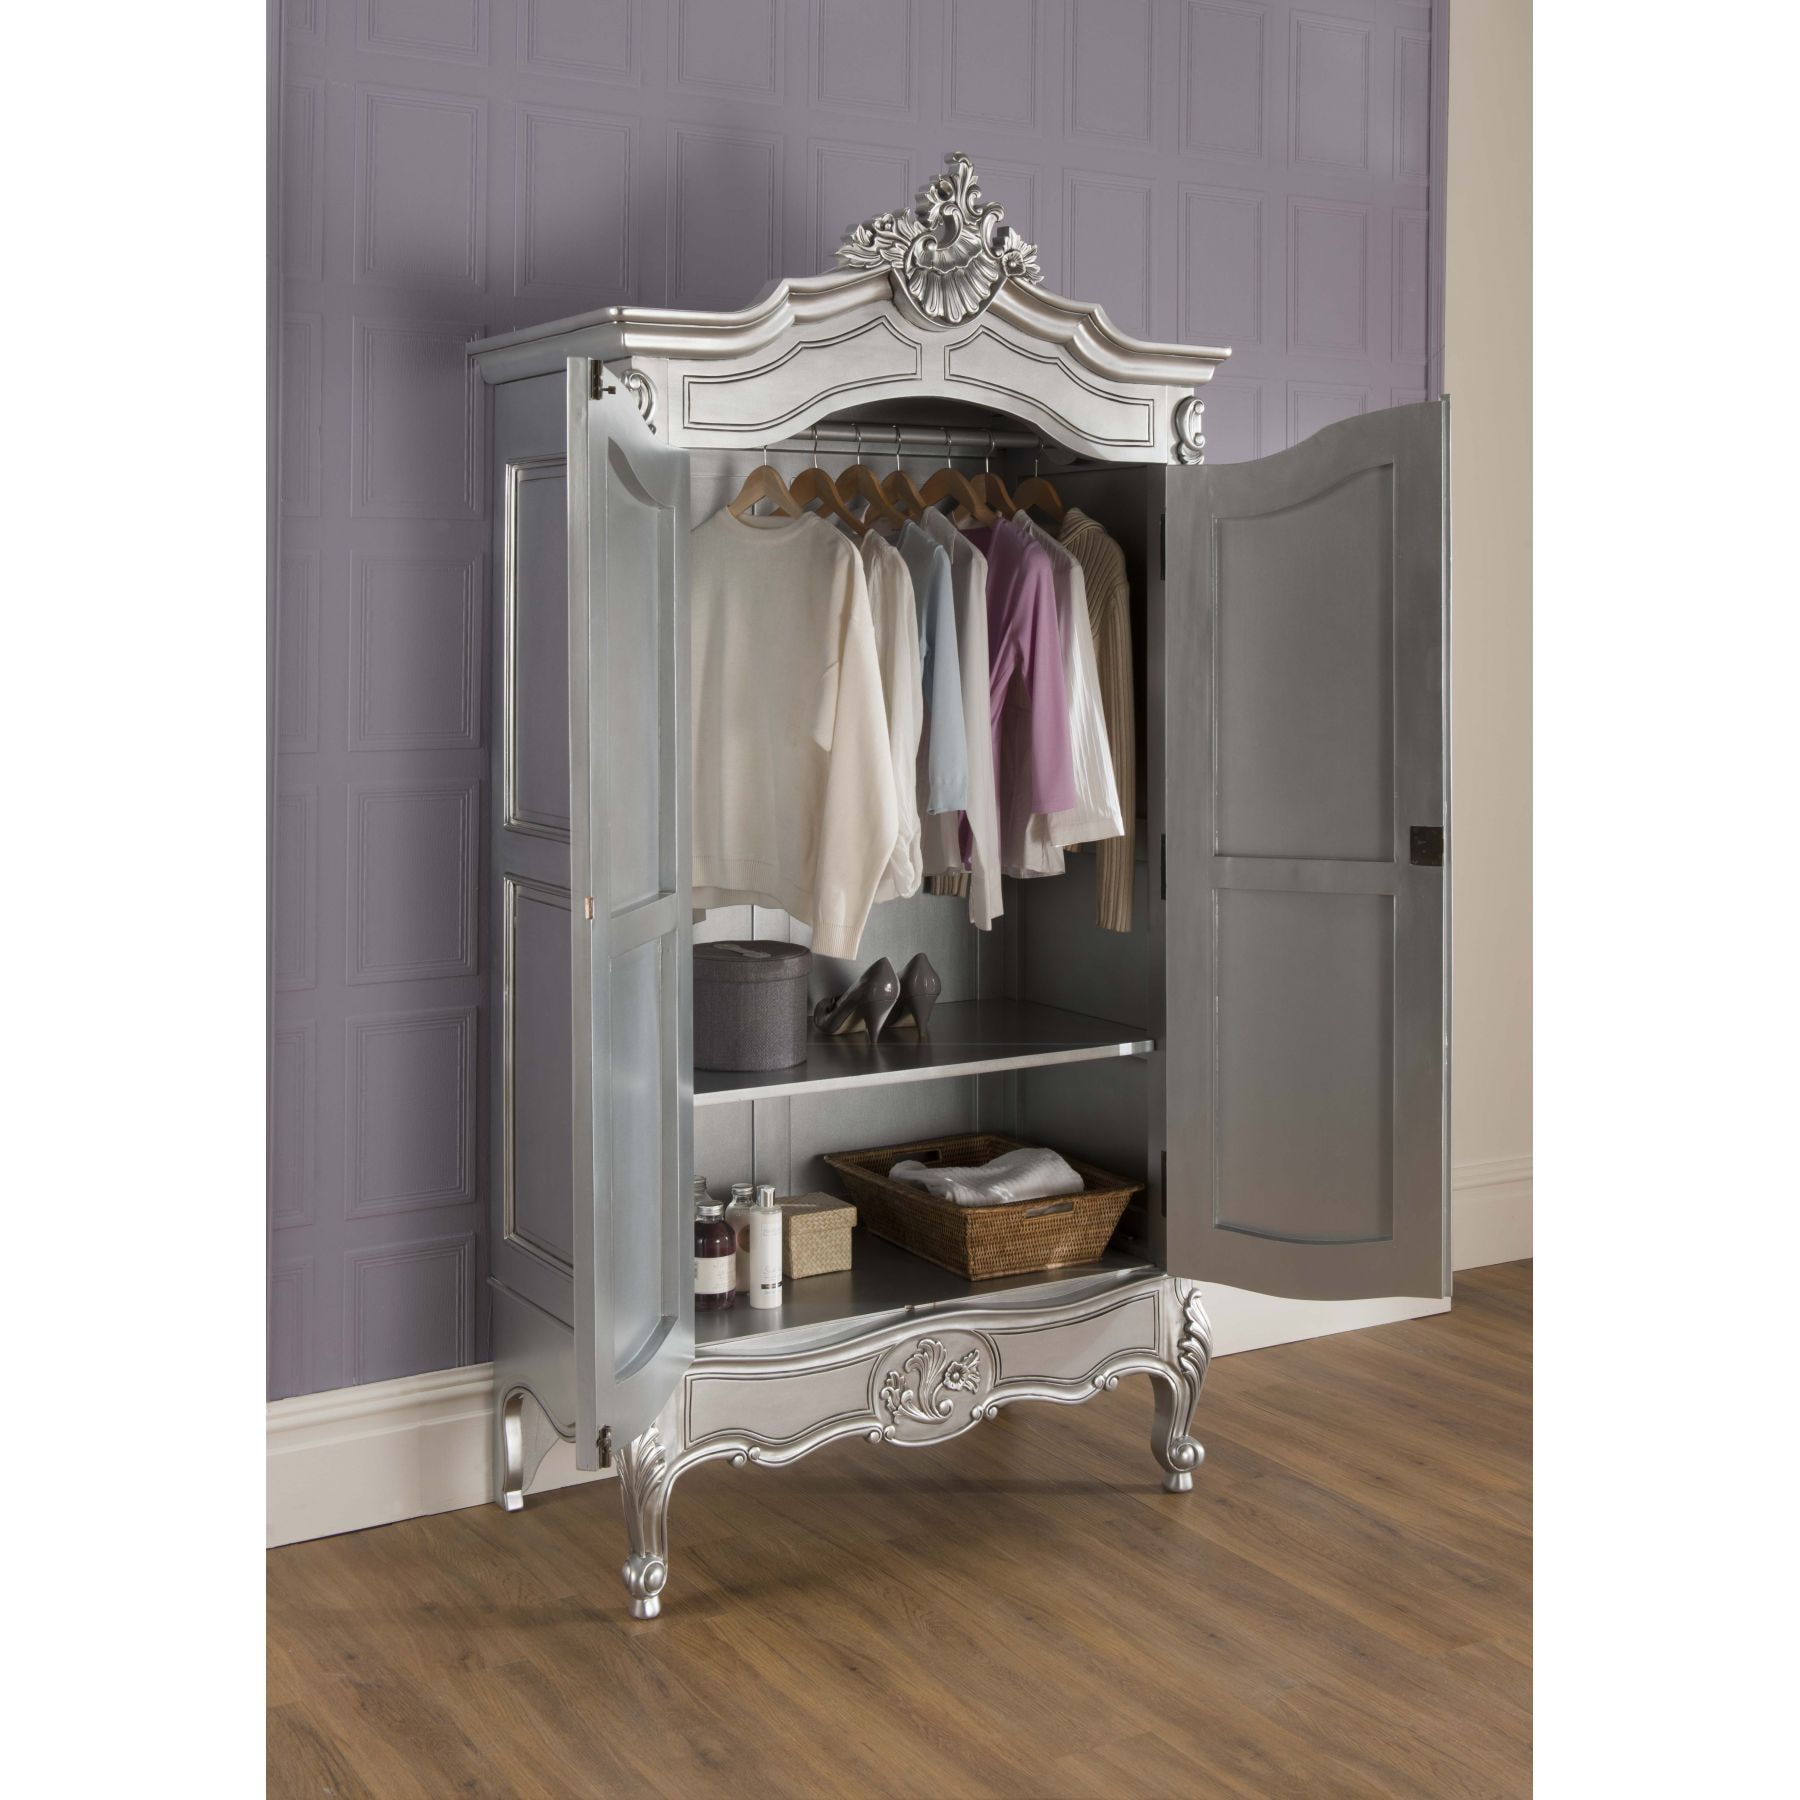 La Rochelle Antique French Wardrobe Works Exceptional Alongside Our Shabby  Chic Furniture Intended For Silver French Wardrobes (Photo 15 of 15)